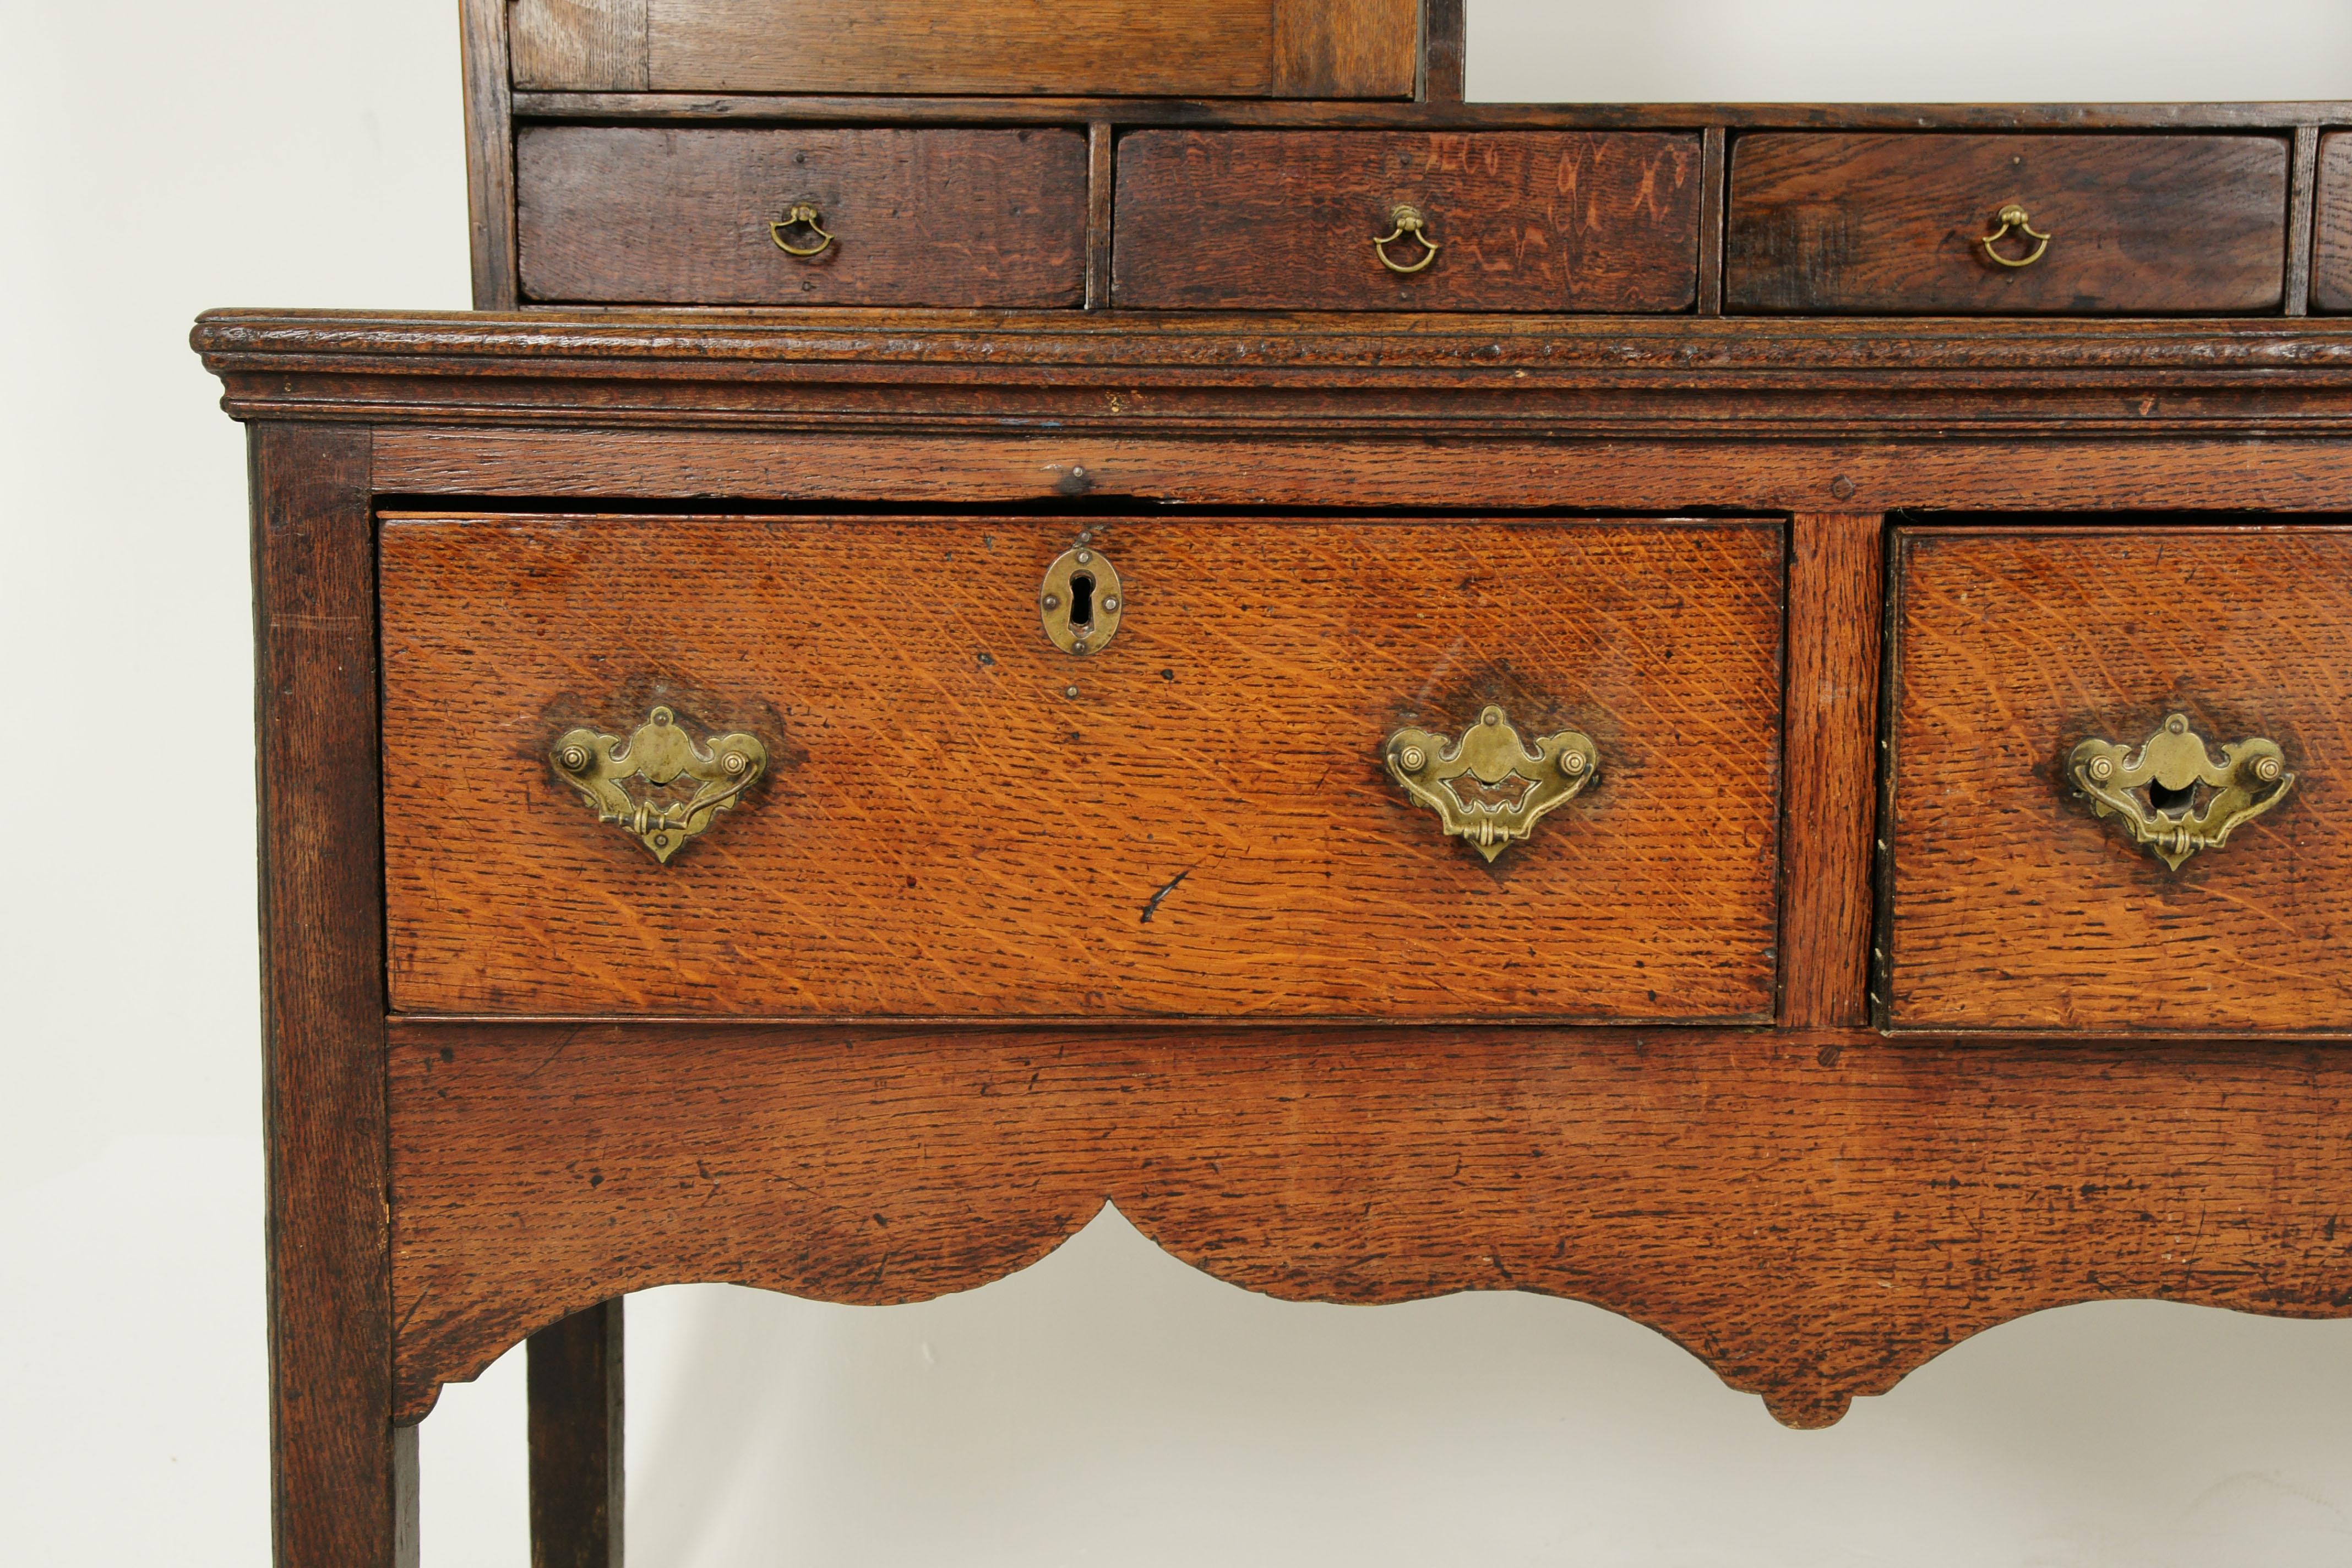 Antique Welsh dresser, oak cottage dresser. Farmhouse Furniture, England 1790, Antique Furniture, B1578.

England 1790
Solid oak construction with original finish
Out turned cornice with scalloped frieze
Graduating plate shelves with molded